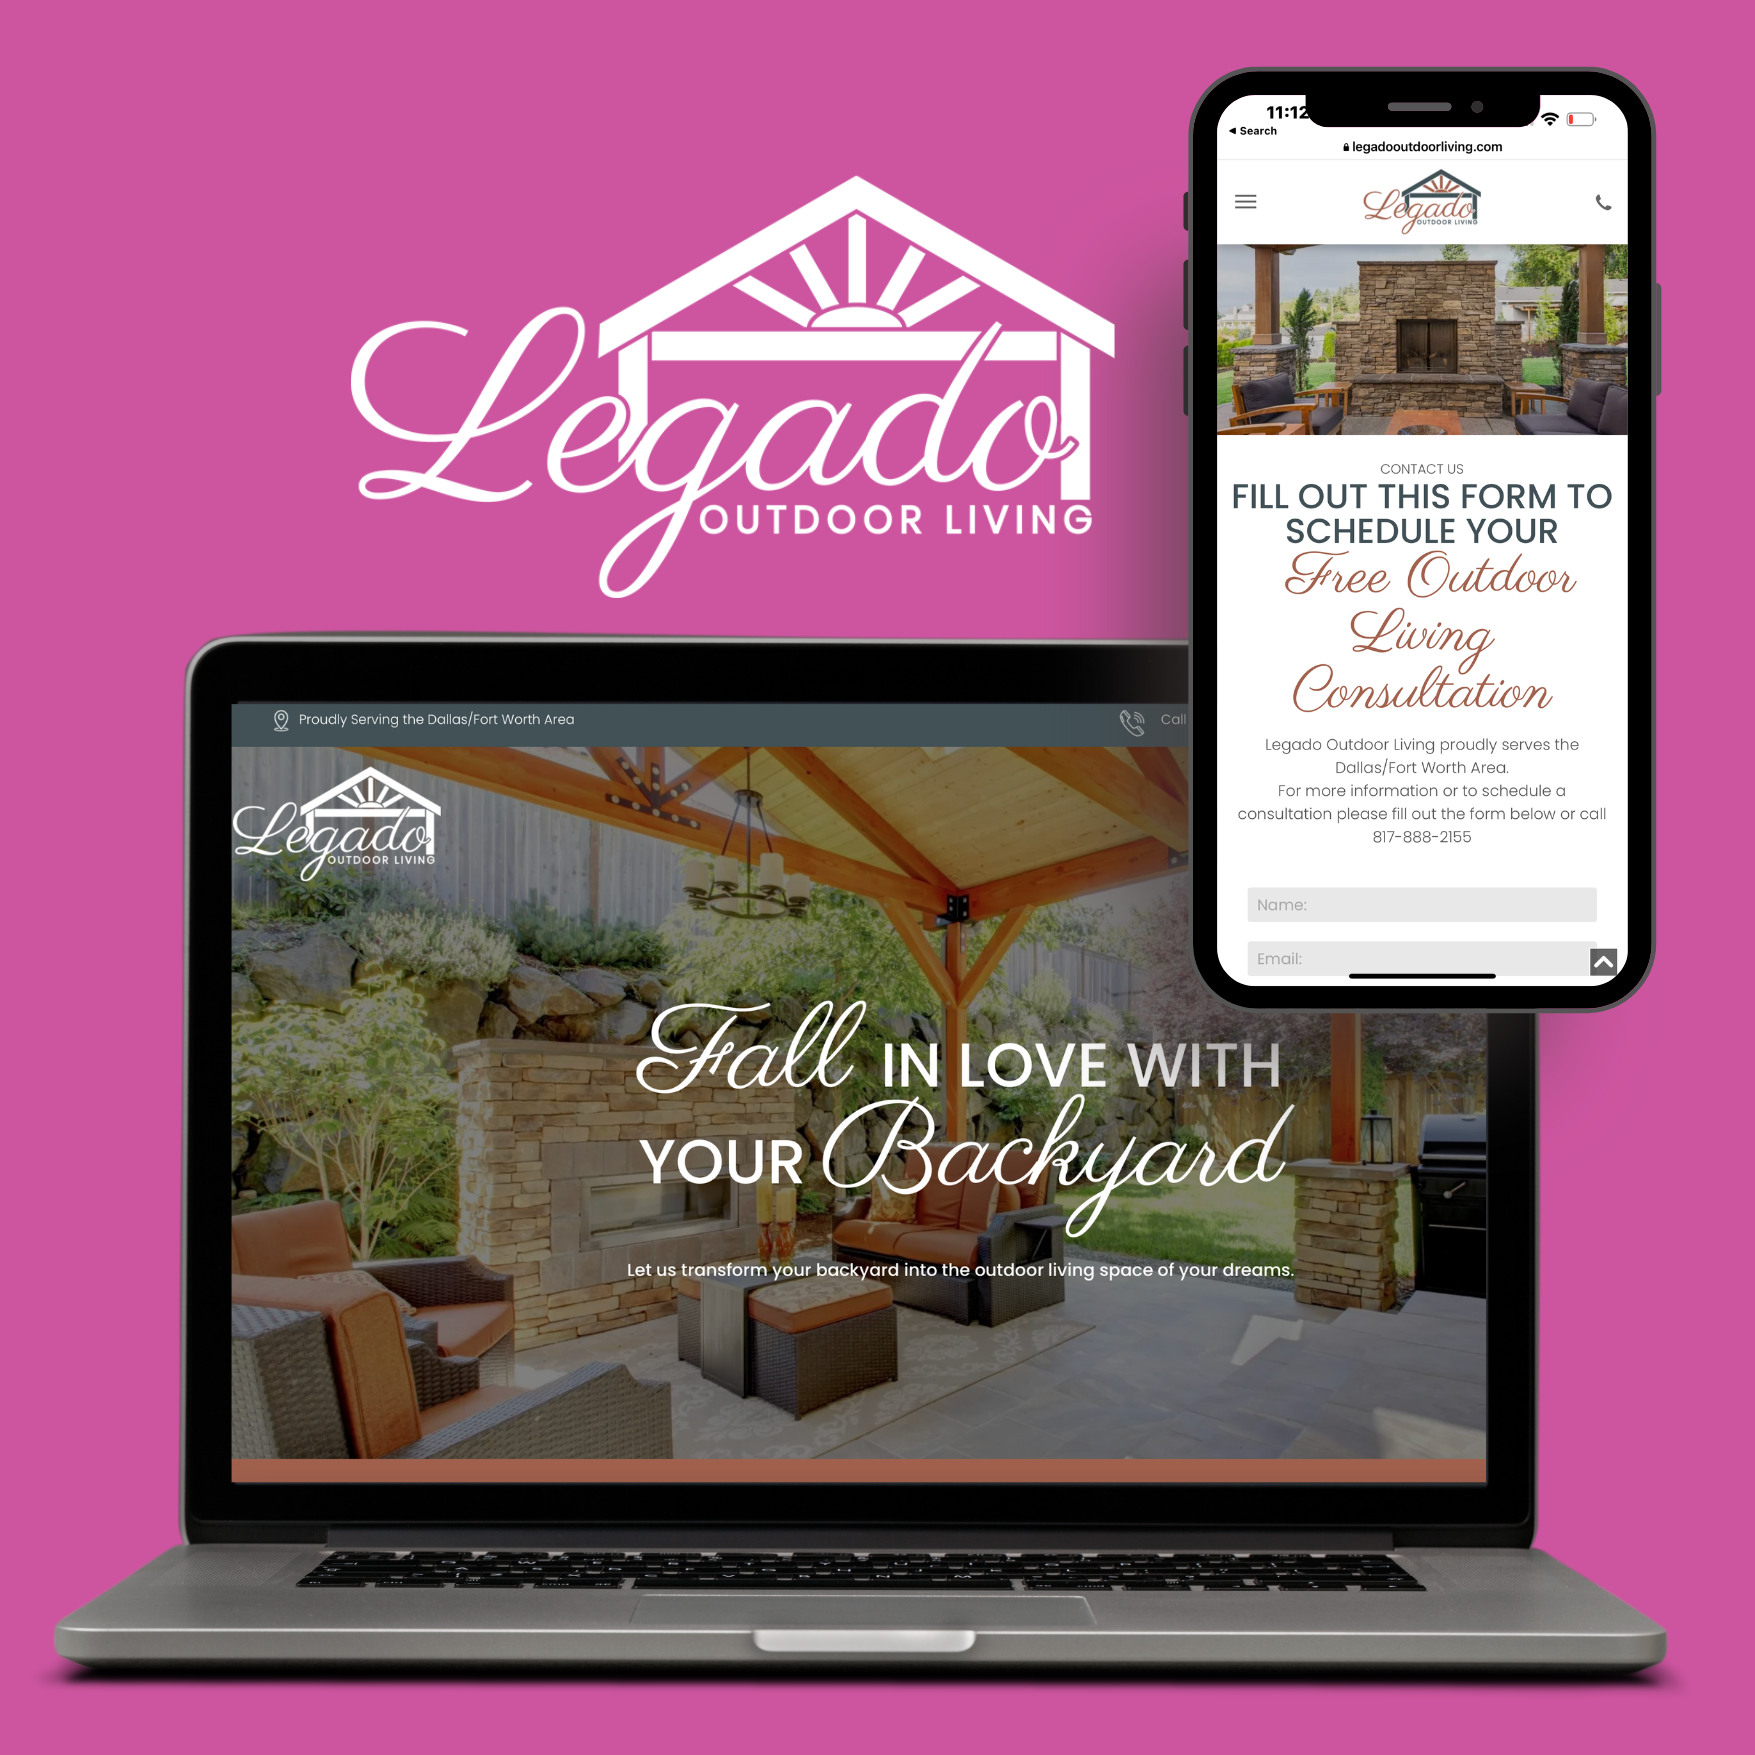 A laptop and a cell phone are displaying a website for legacy outdoor living.